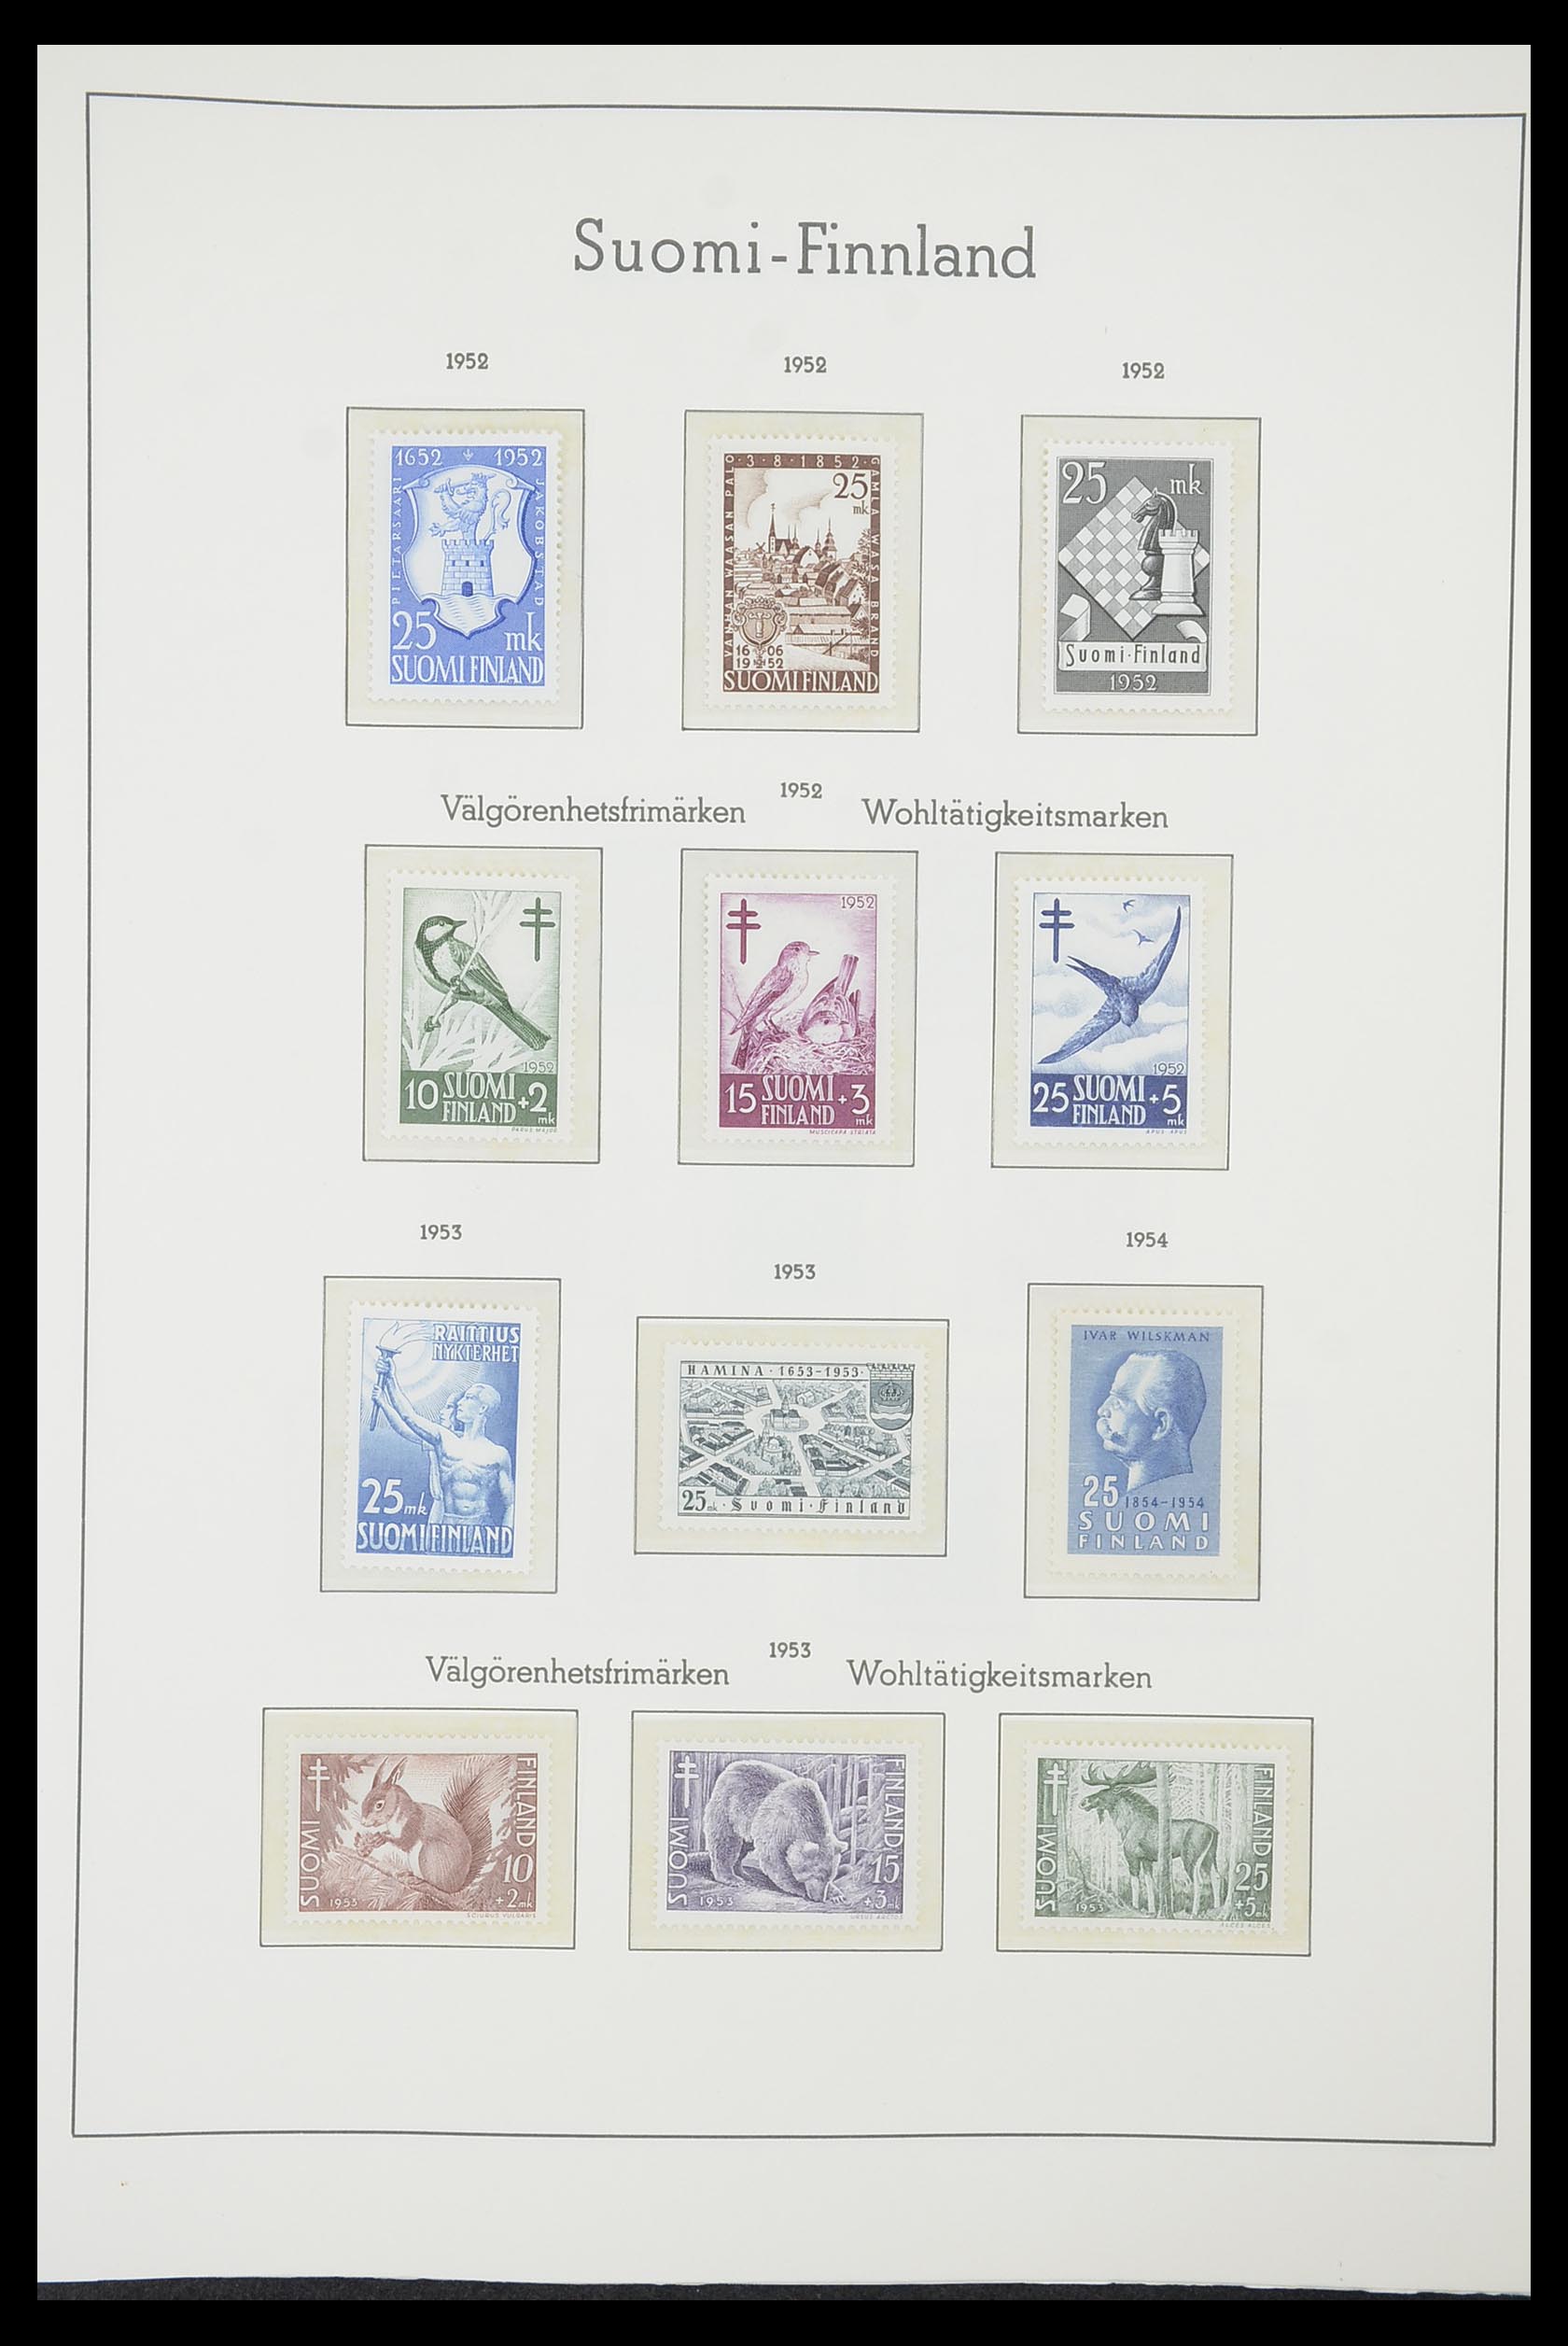 33831 033 - Stamp collection 33831 Finland 1889-1998.